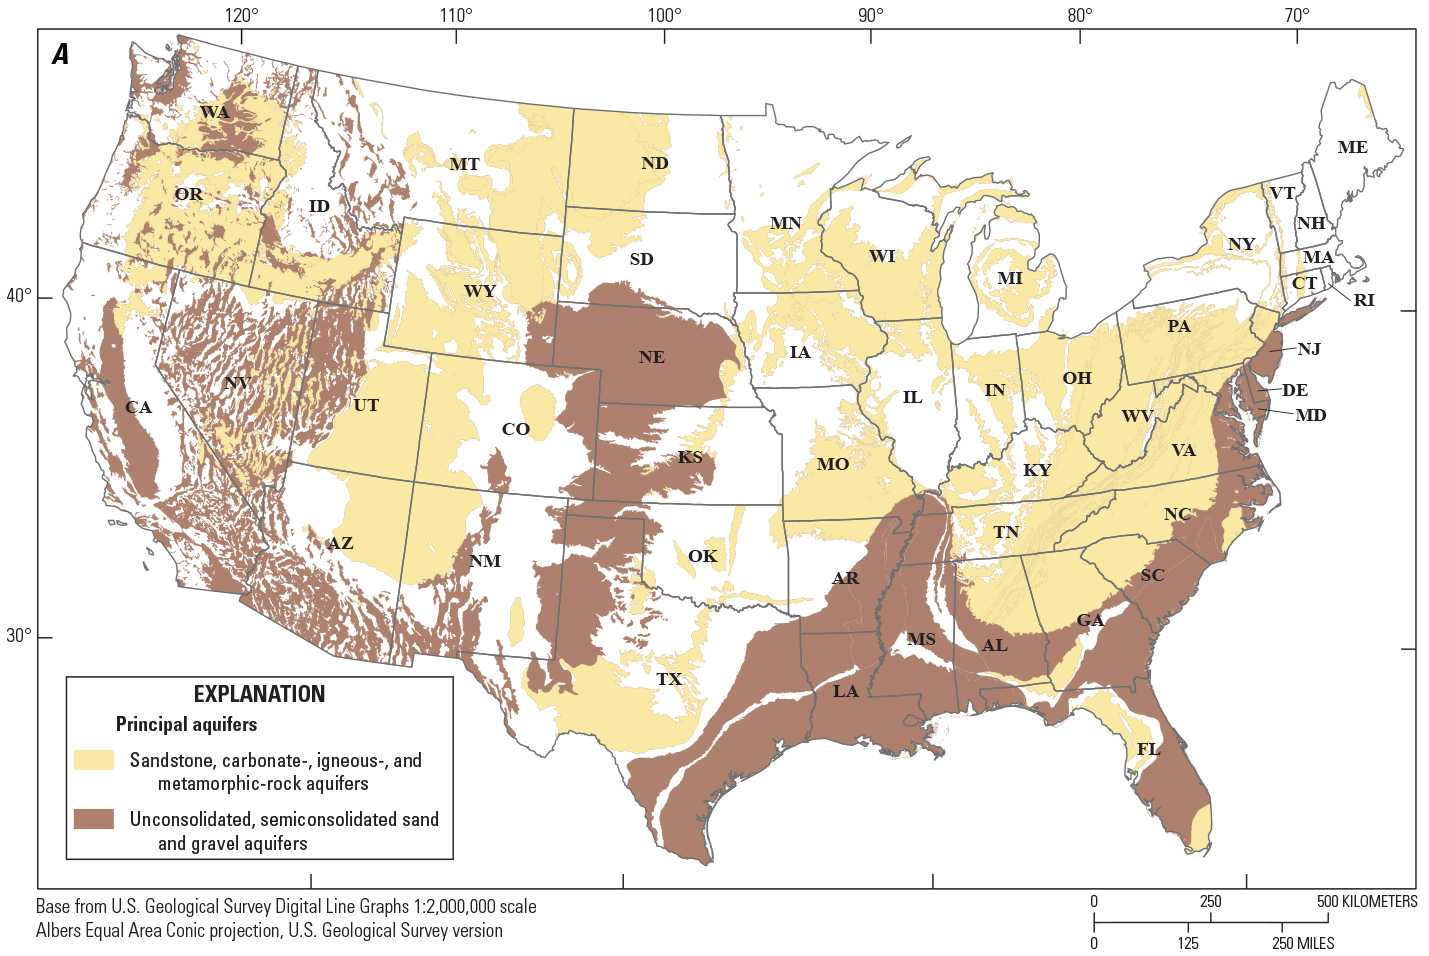 The principal aquifers of the United States that are designated as fractured rock
                     are primarily in the eastern, upper Midwest and western United States. Secondary hydrogeologic
                     regions are primarily fractured rock and cover parts of the United States that are
                     not designated as principal aquifers.